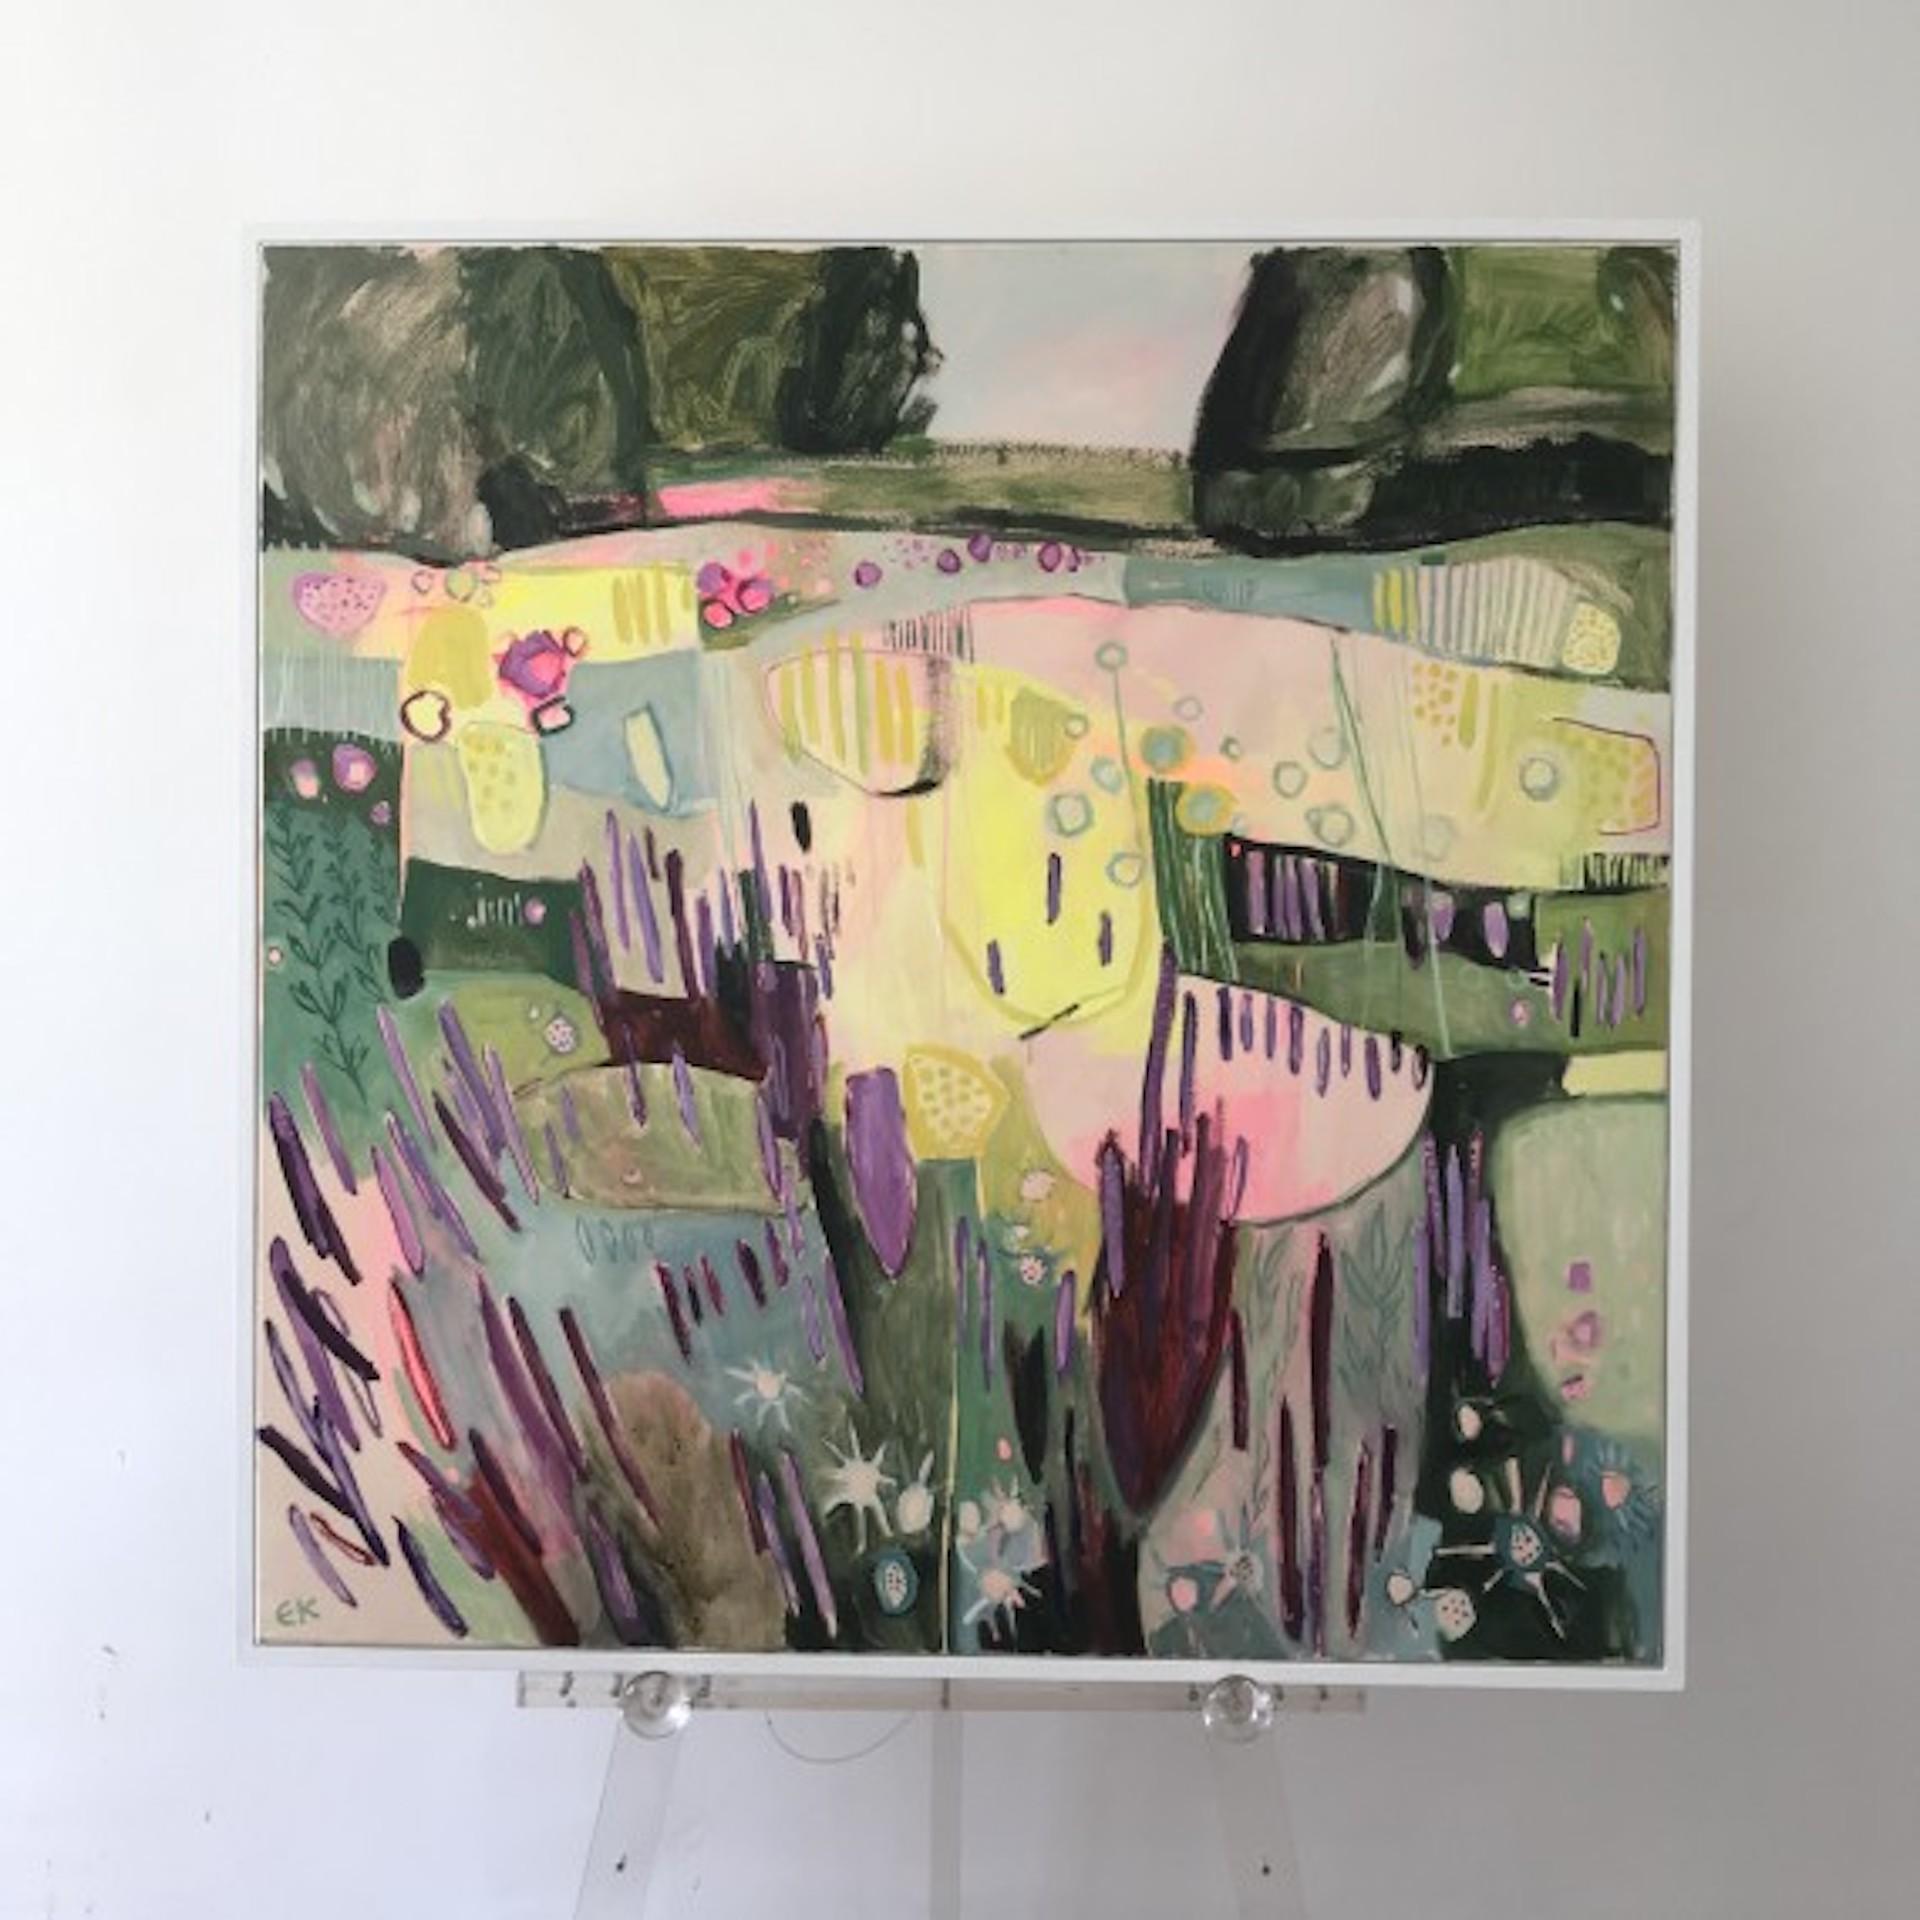 Yellow, Pink and Purple in the Merton Beds [2019]
Original
Landscapes and seascapes
Oil and Acrylic on canvas
Image Size: H:100 cm x W:100 cm
Framed Size: H:102 cm x W:102 cm x D:4cm
Sold Framed
Please note that insitu images are purely an